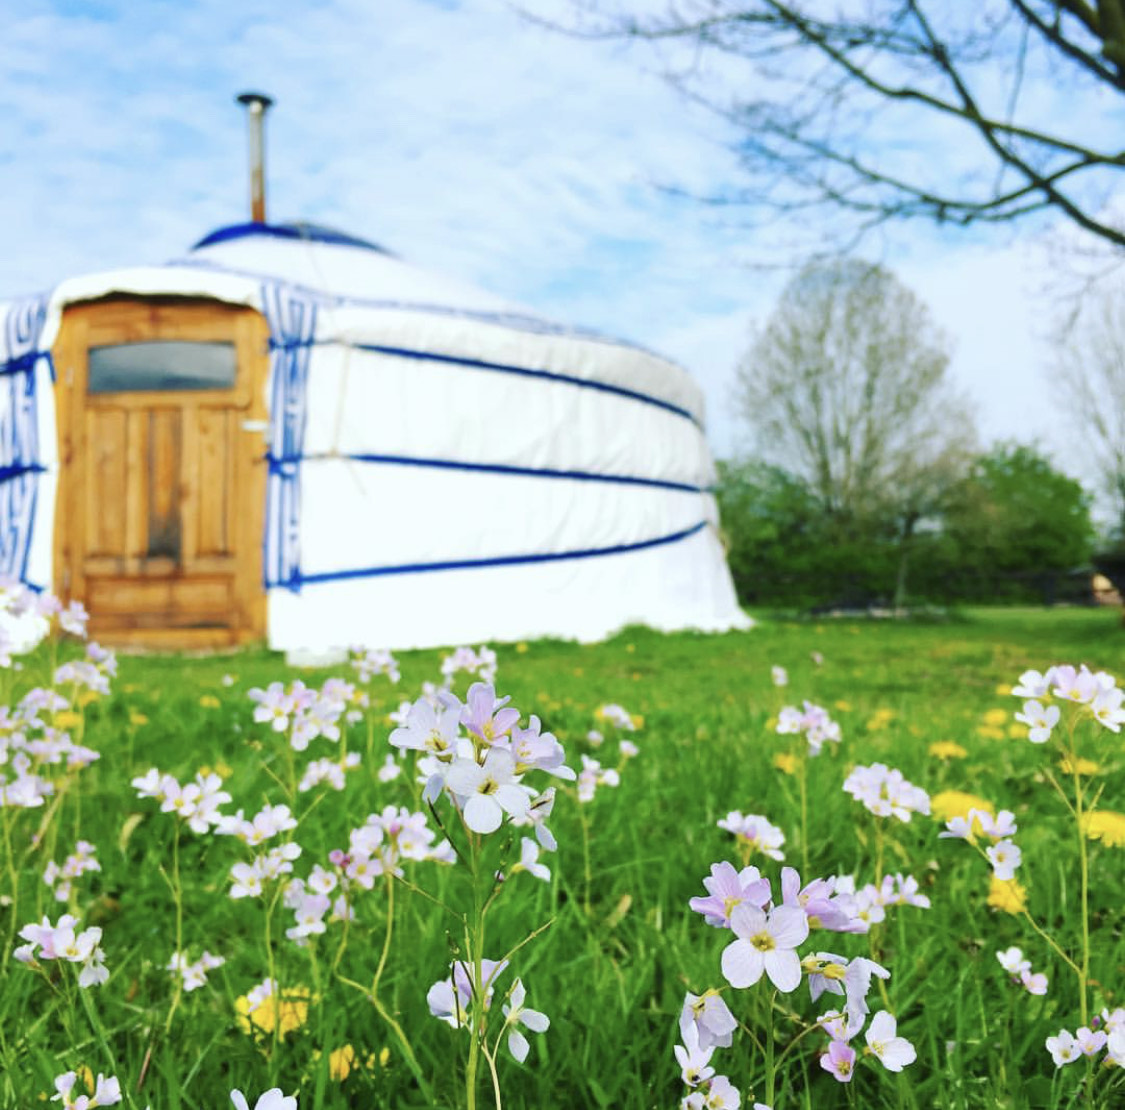 The Yurt Project